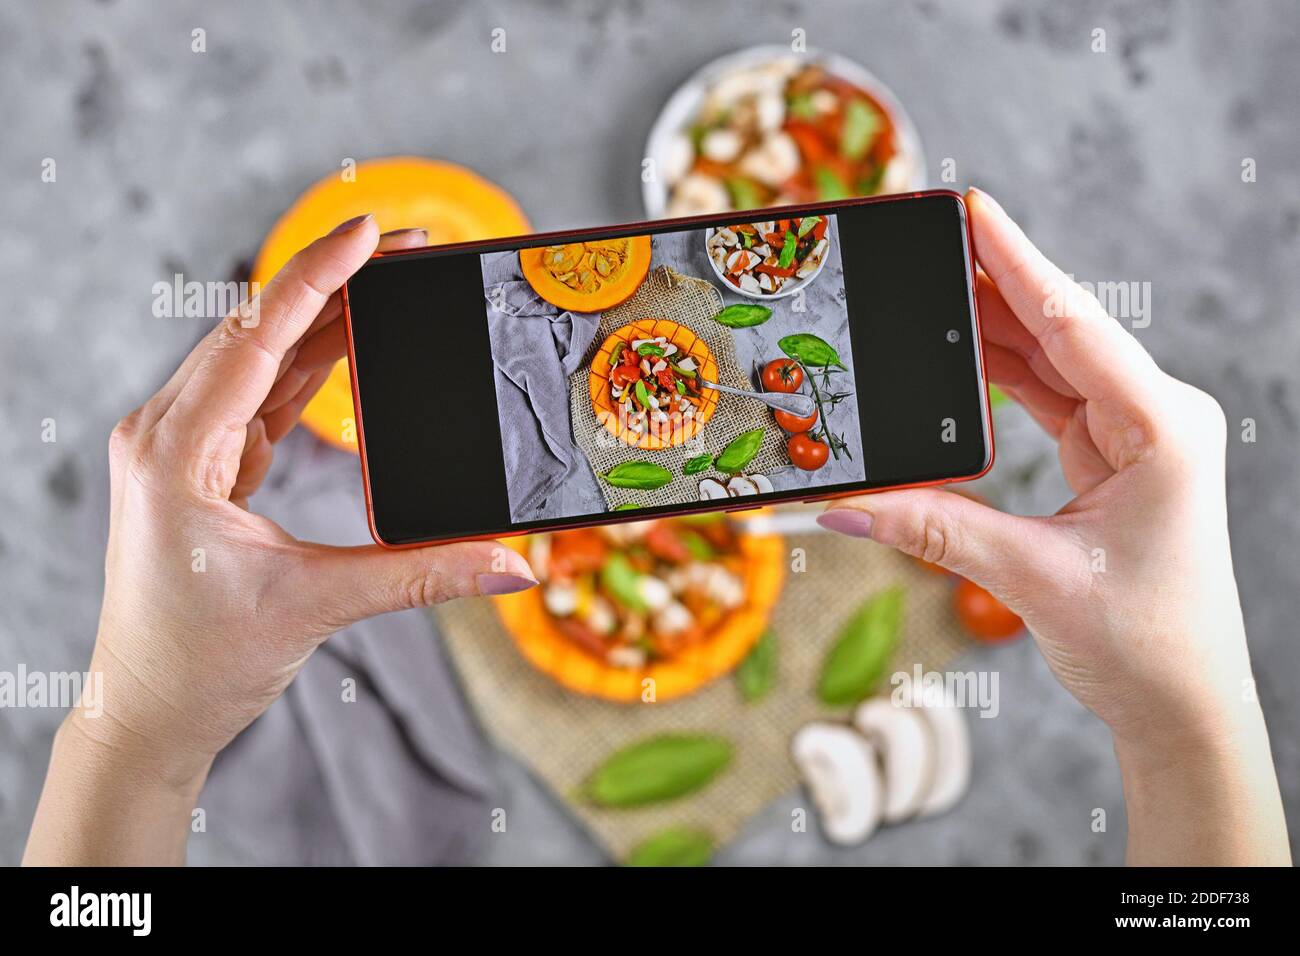 Taking photo of food with hands holding mobile phone with picture of vegan baked Red kuri squash vegetable filled with bell pepper, tomatoes and mushr Stock Photo